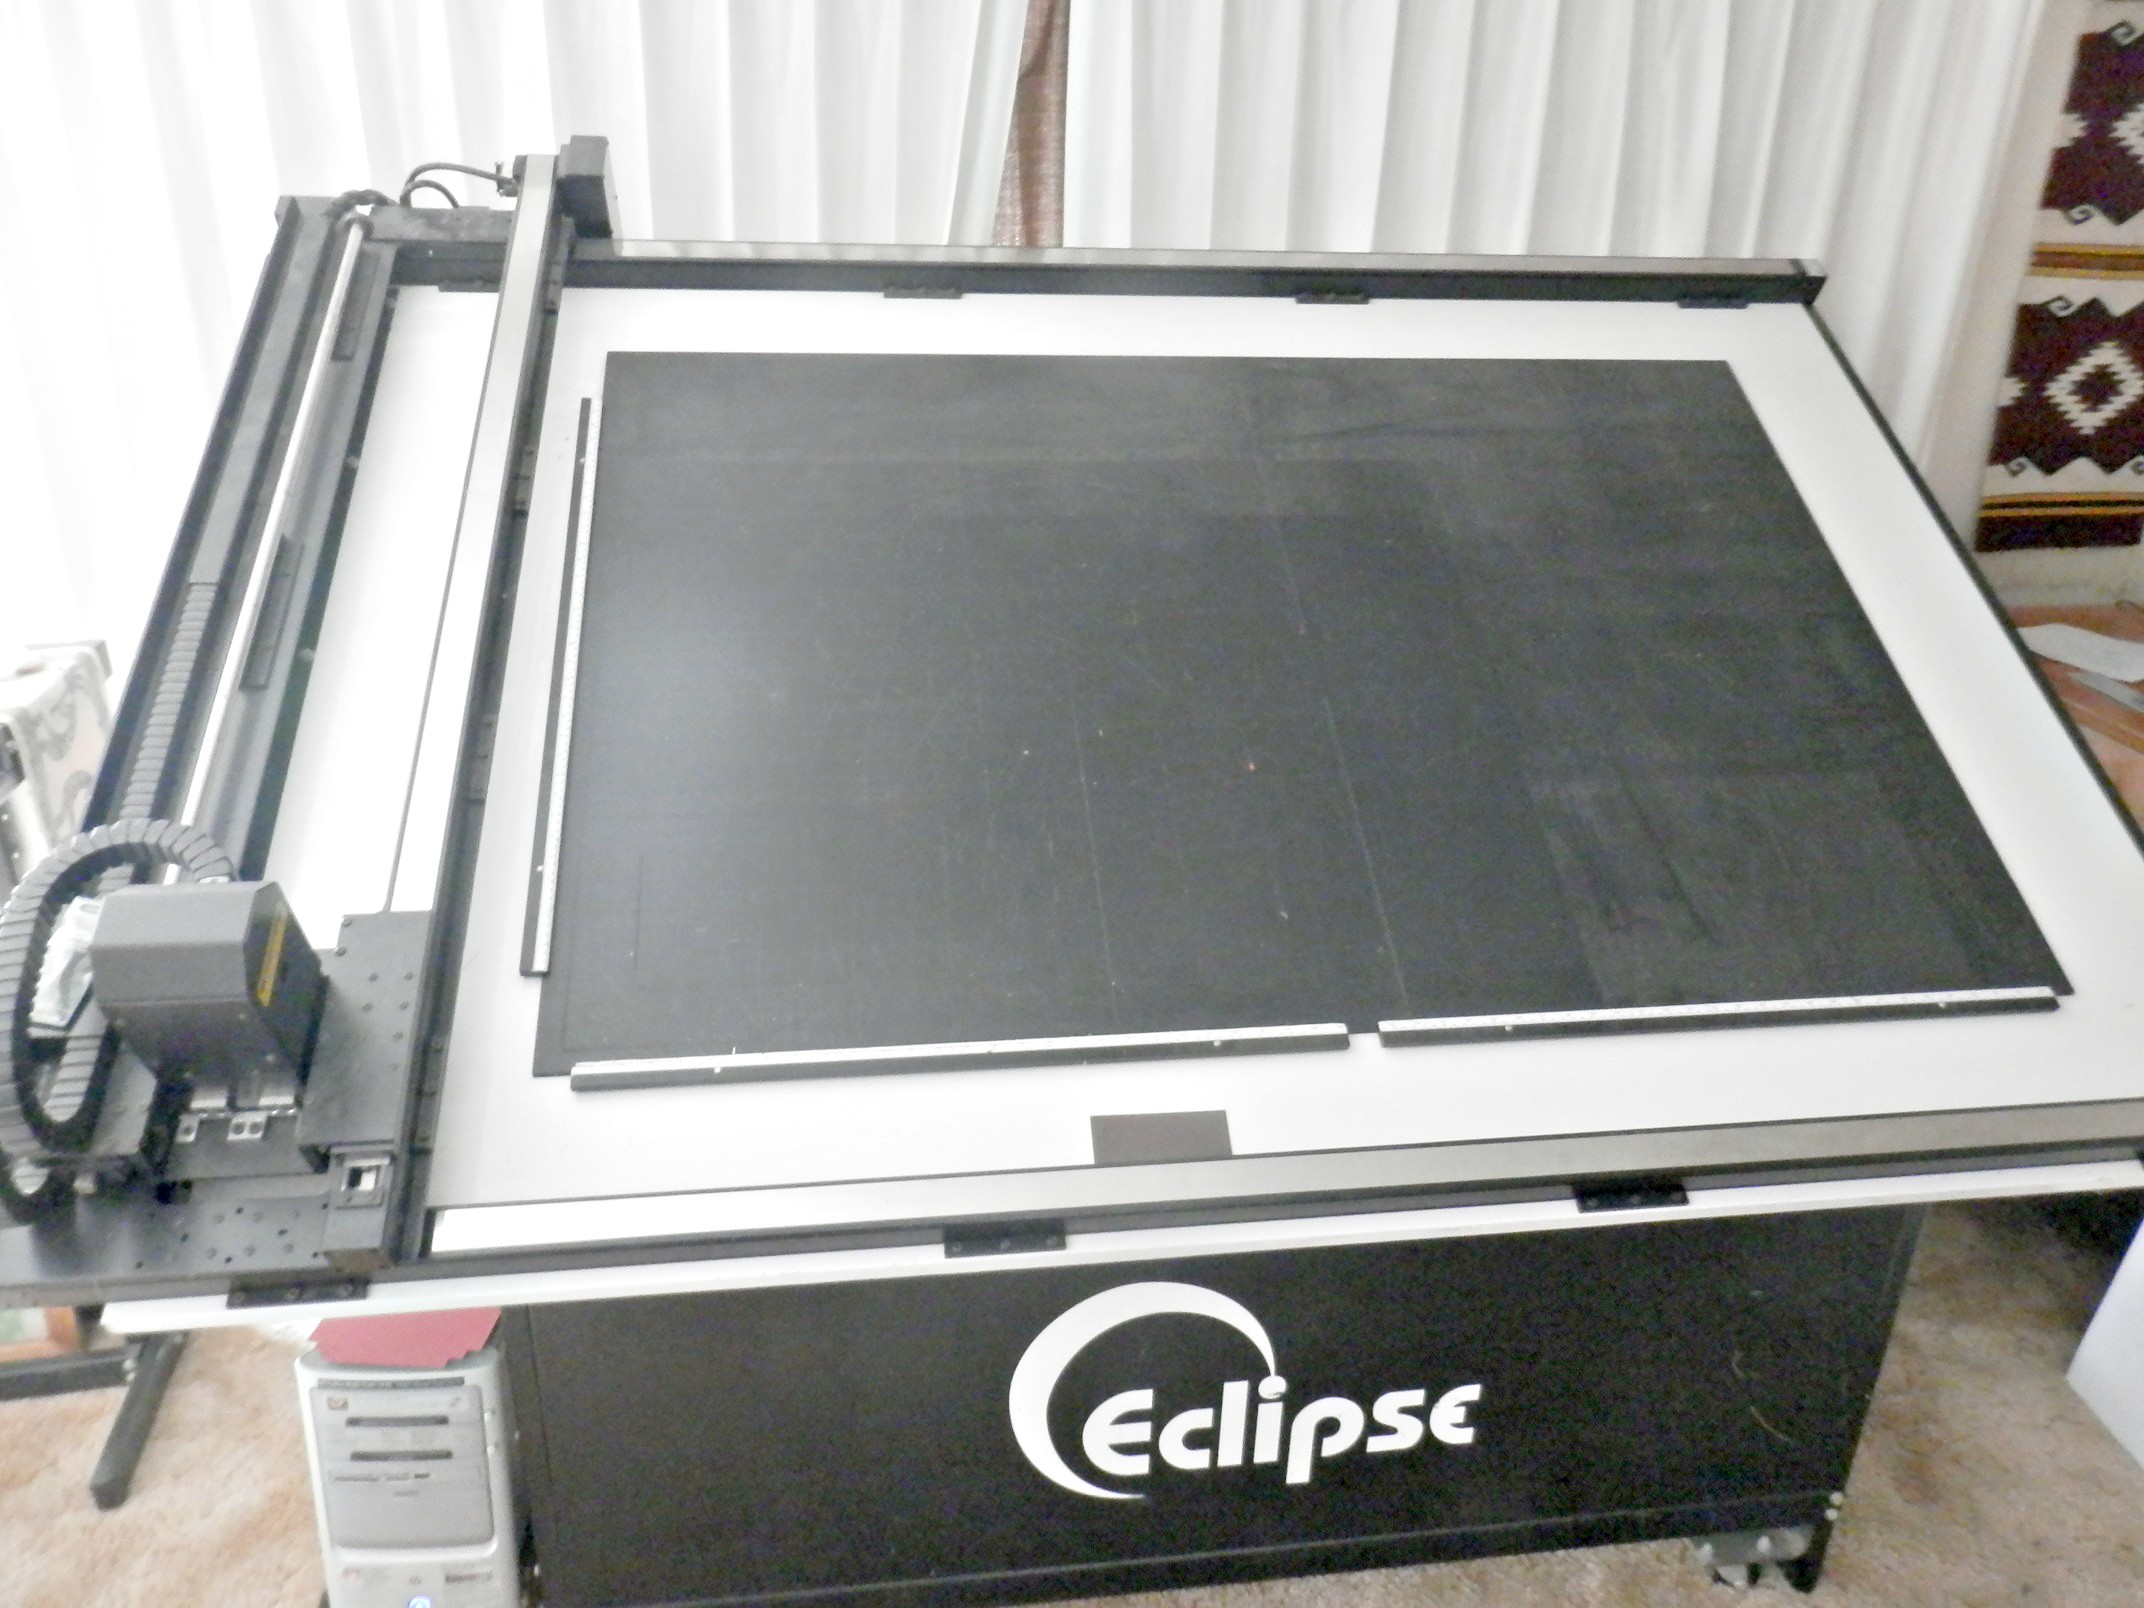 Eclipse CMC Computerized Mat Cutter & Hansen Picture Framing Chopper (used) Item # AGFS-29 (Wyoming)